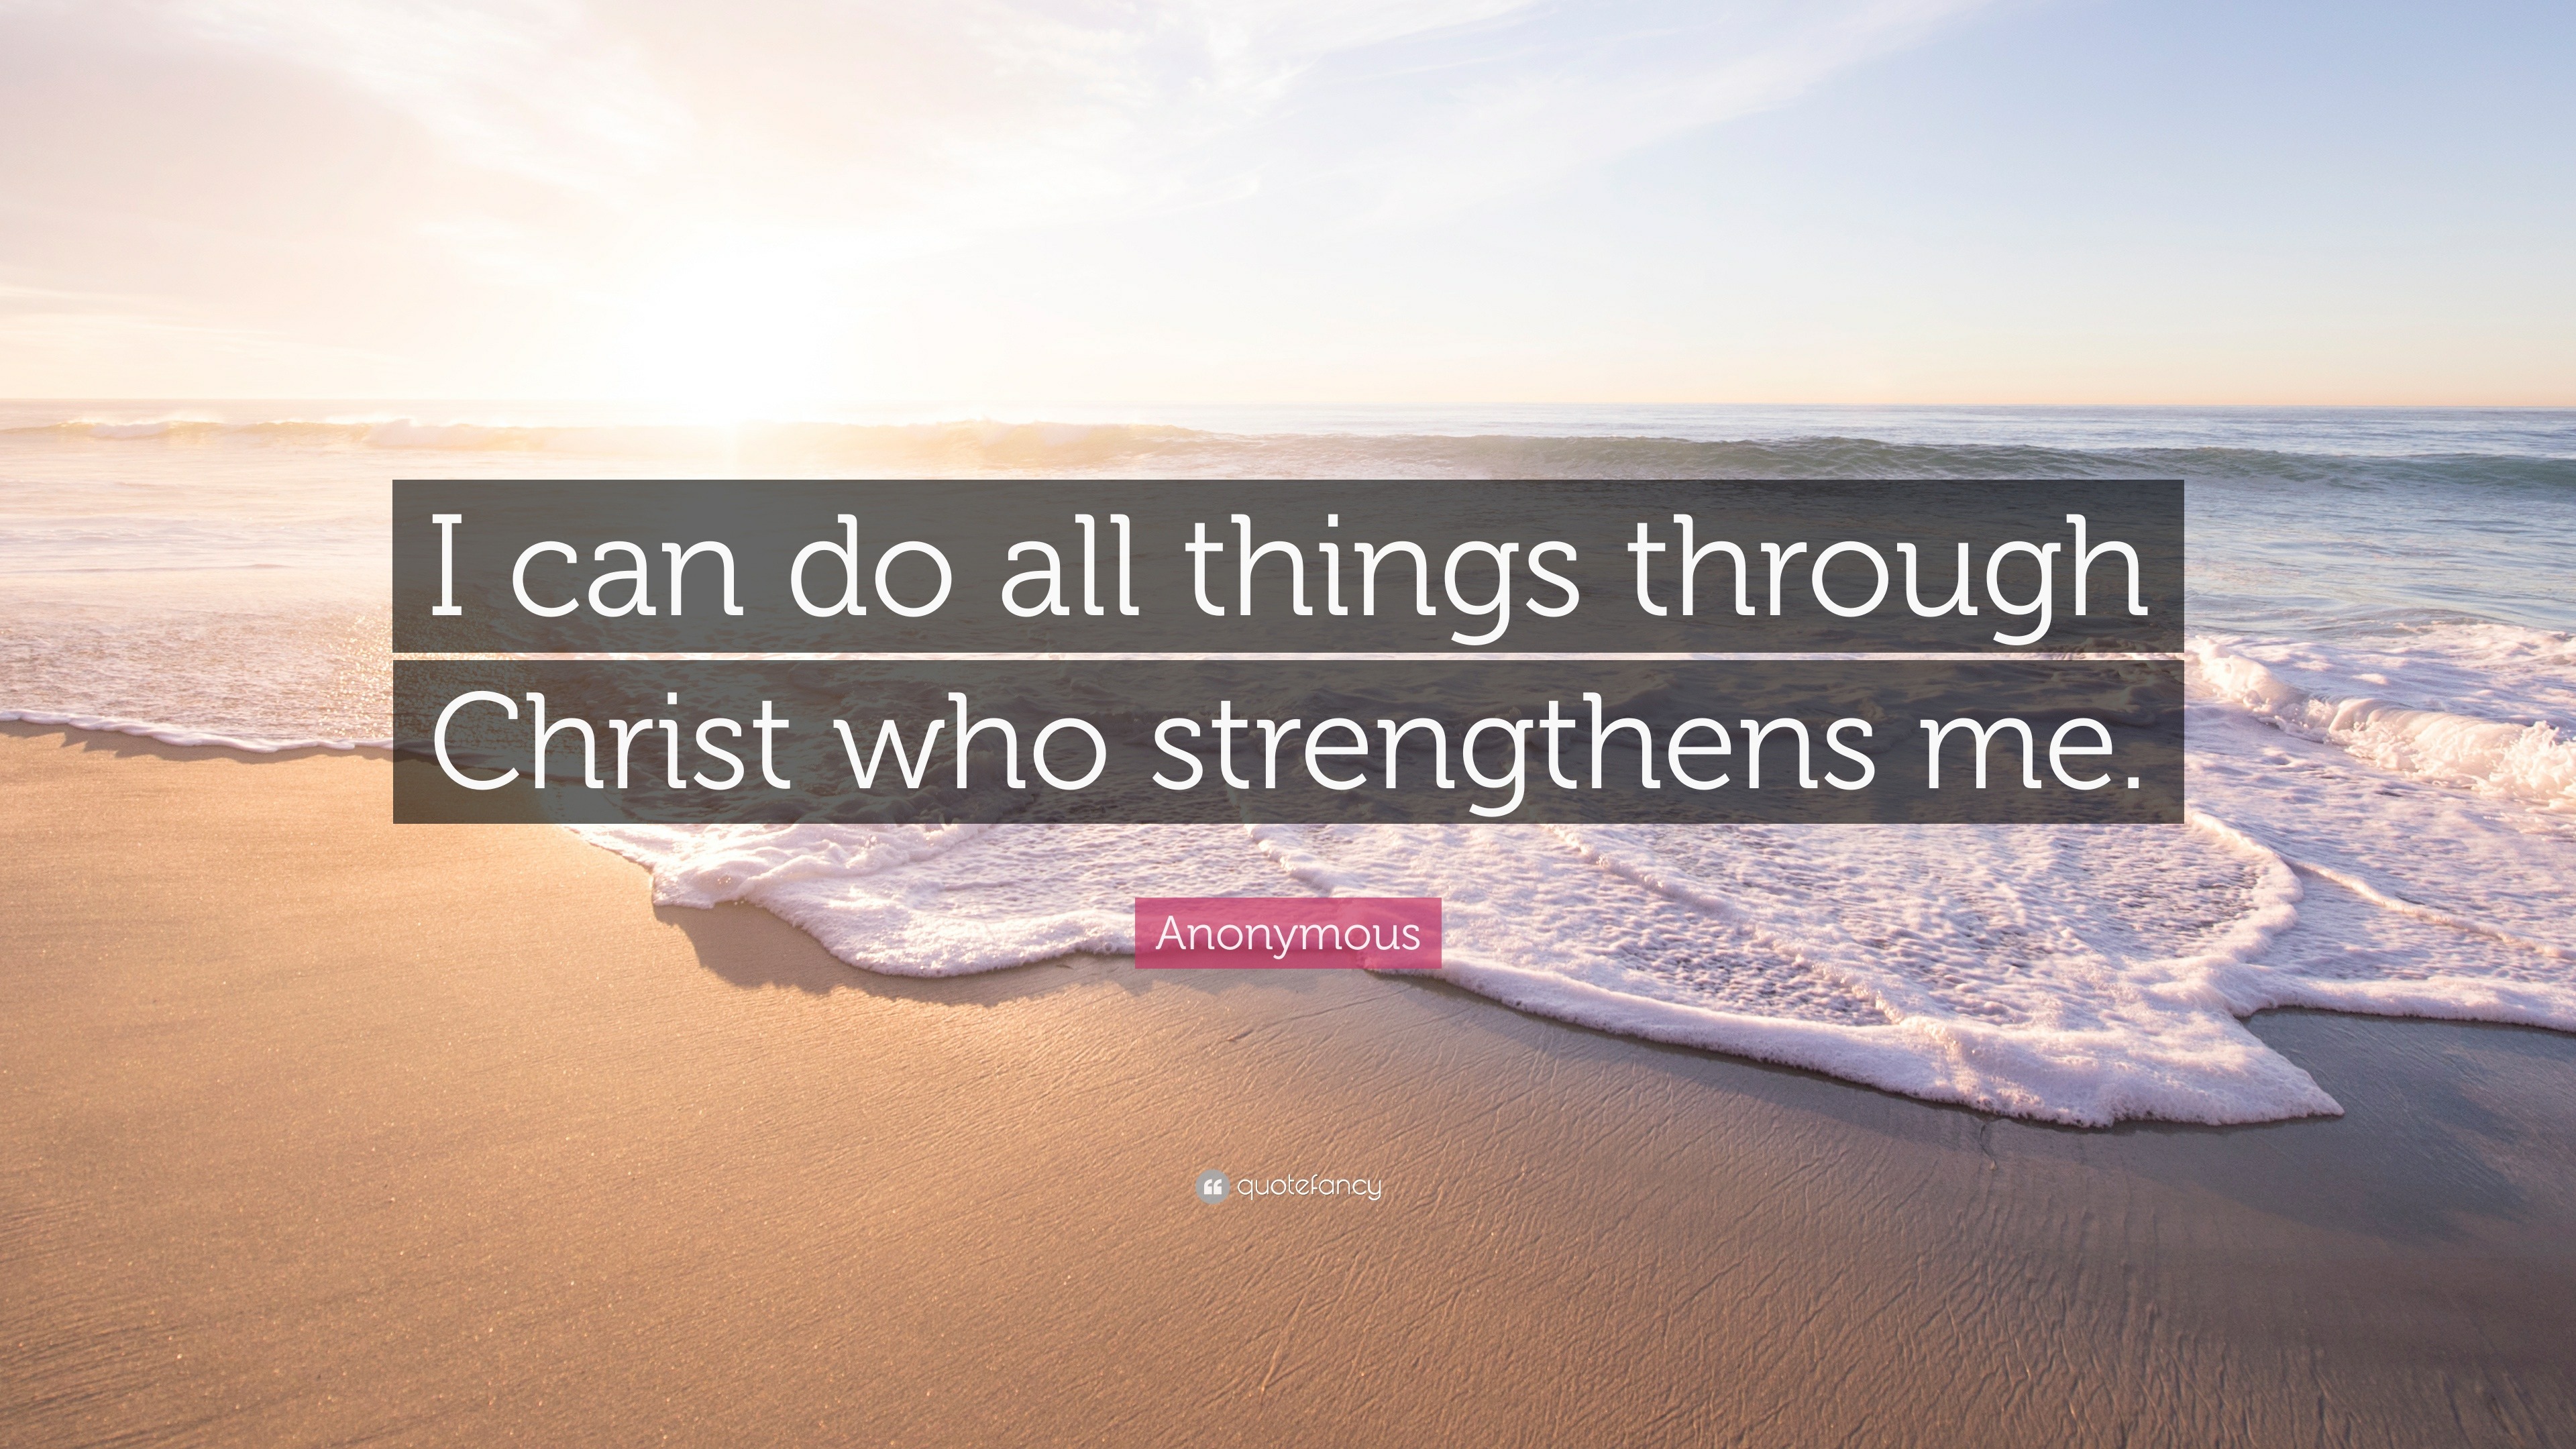 Anonymous Quote: “I can do all things through Christ who strengthens me